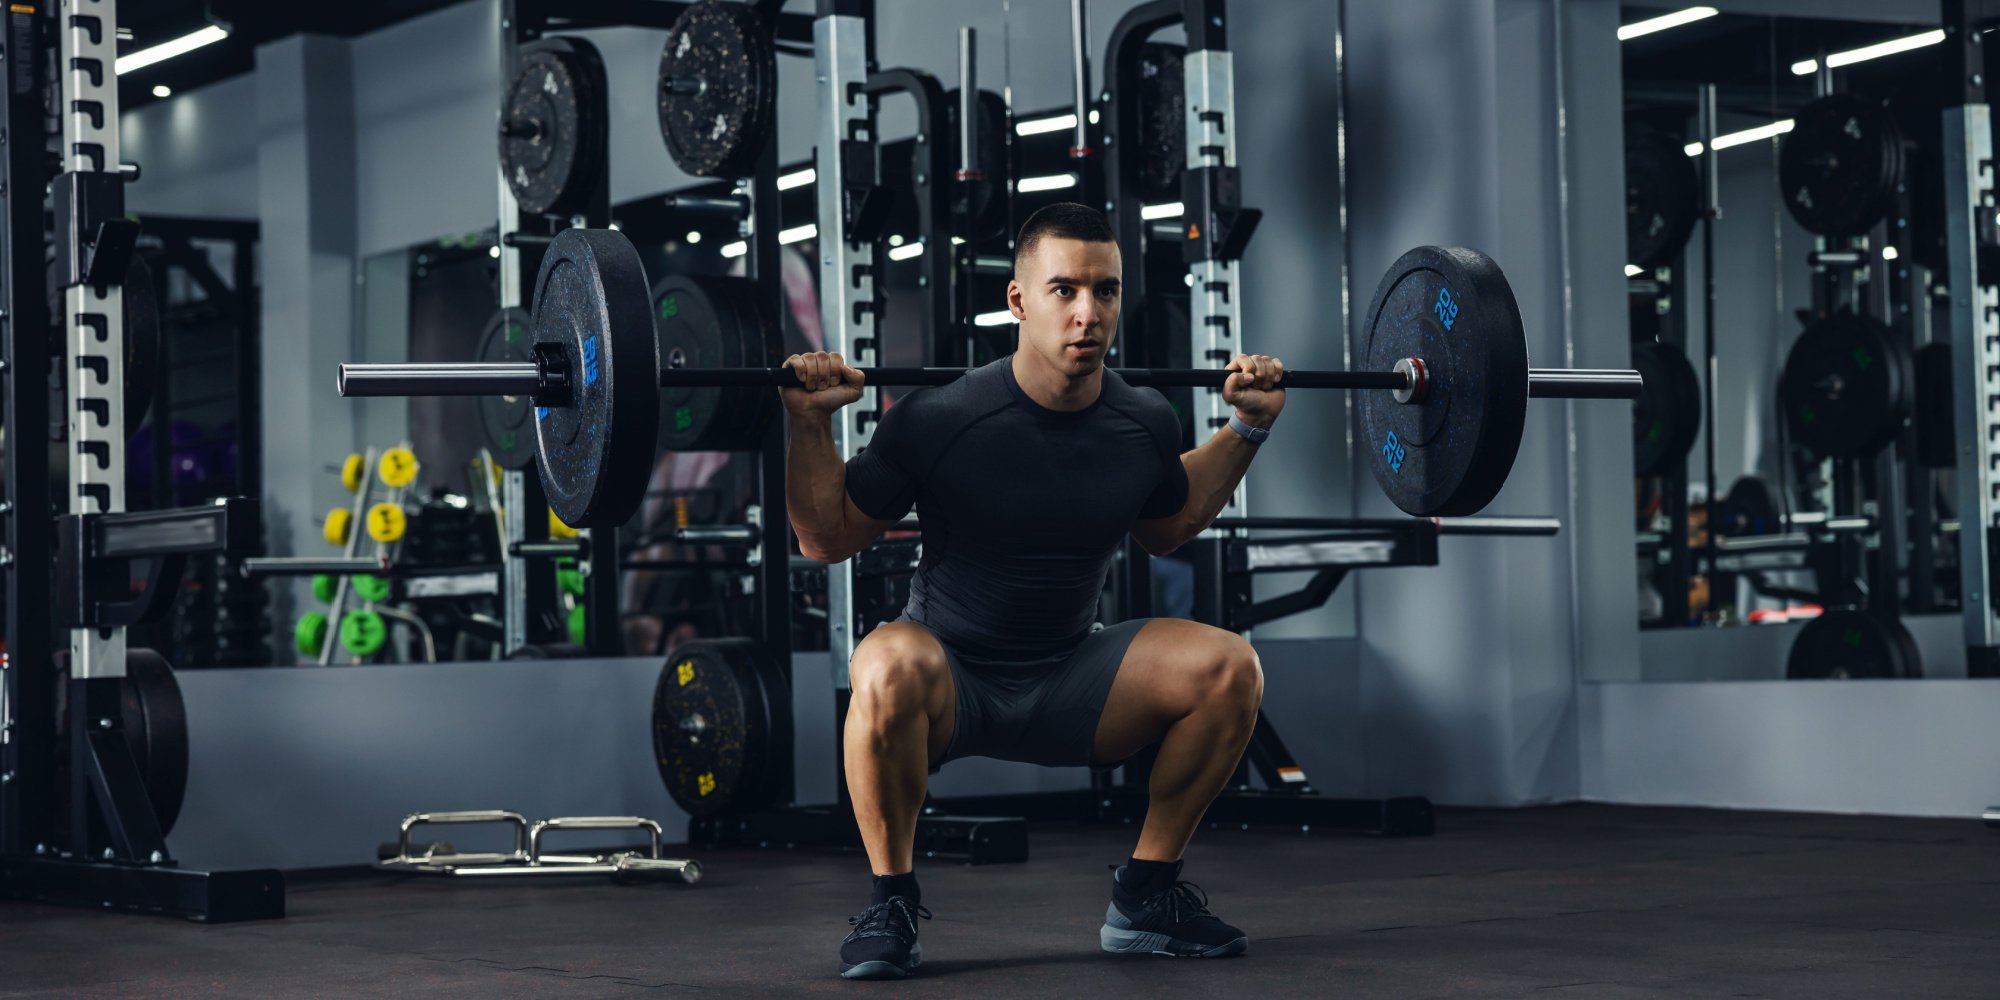 How to Gain More Strength on Your Barbell Squat